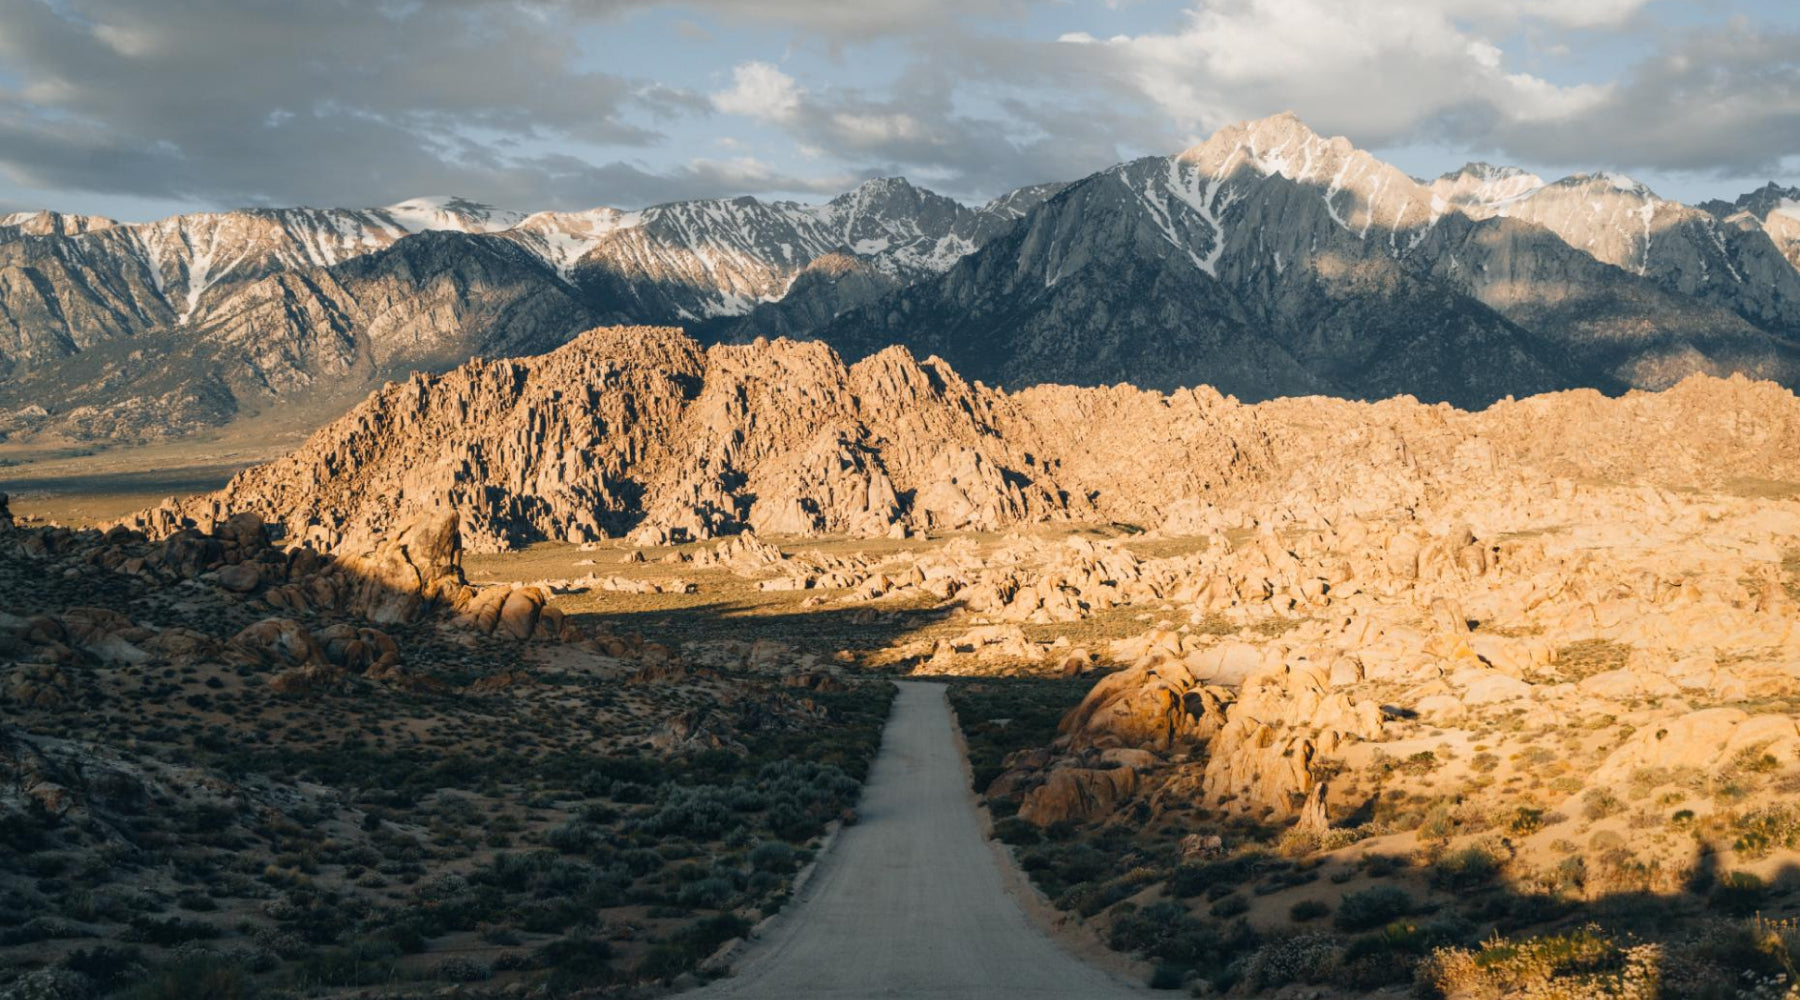 Dirt road leading to Alabama Hills, California.  Sun on snow capped mountains with clouds.